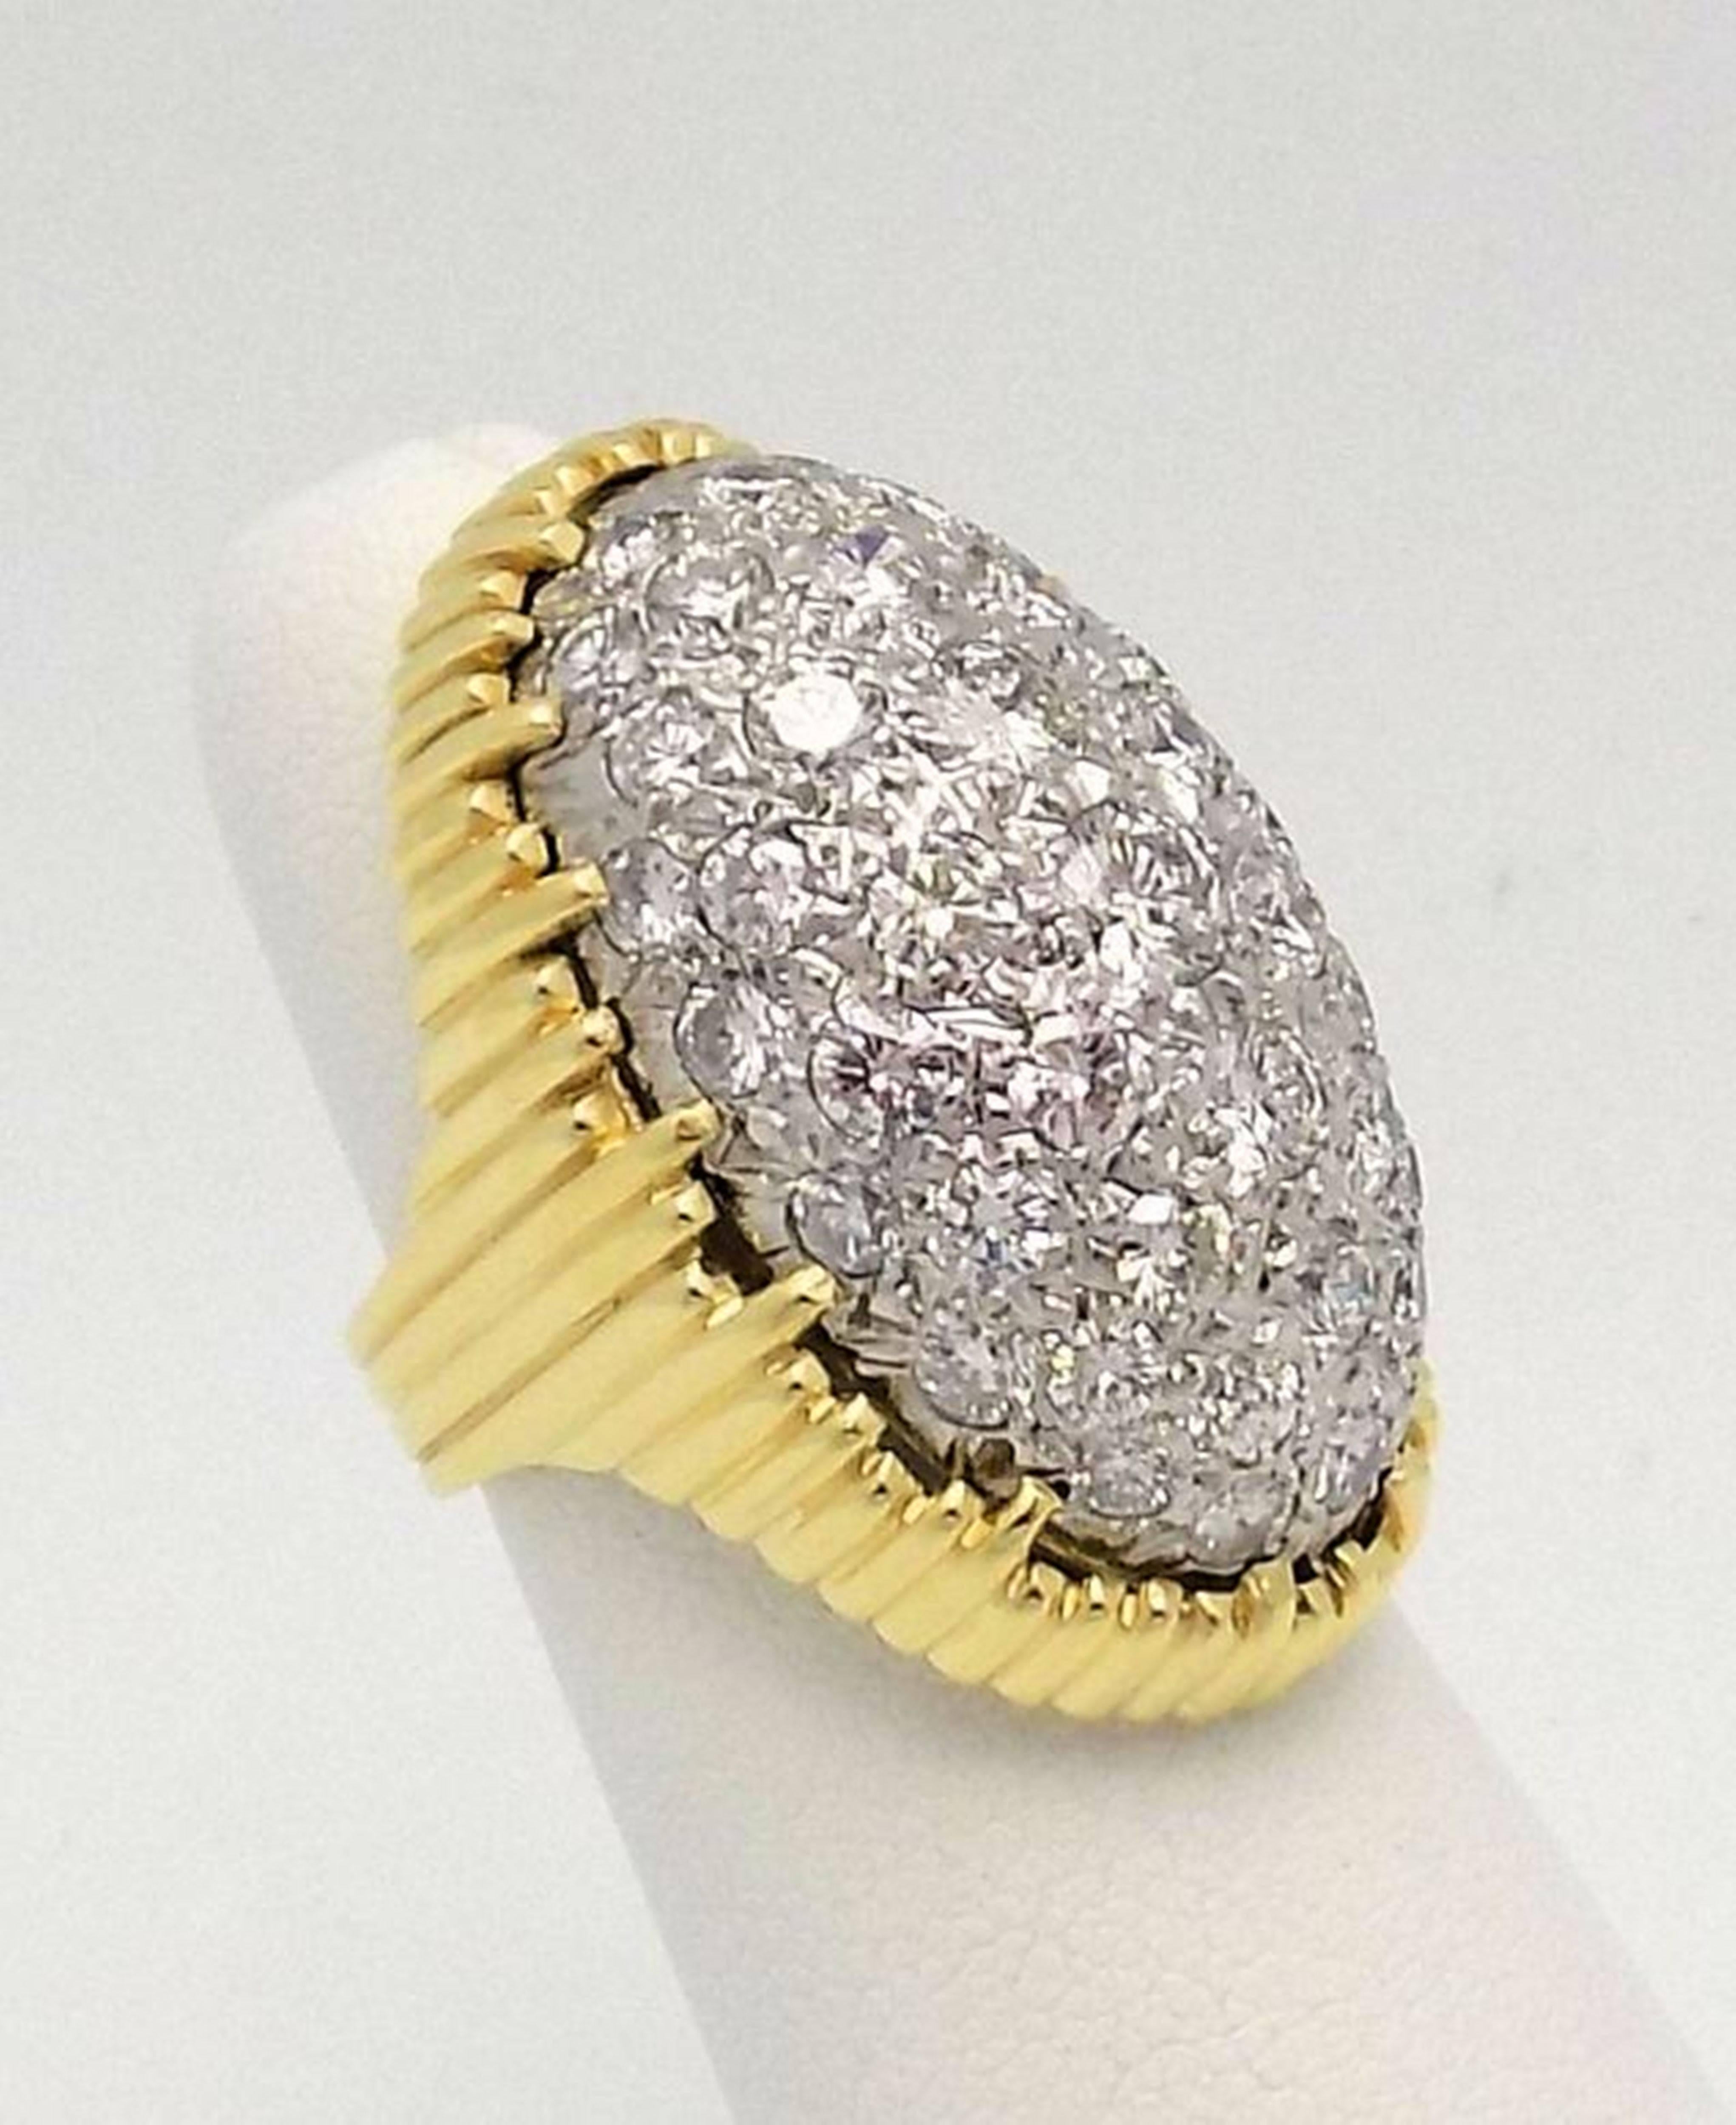 Pave' Diamond and 18 Karat Yellow/White Gold Dome Ring In Good Condition For Sale In Dallas, TX